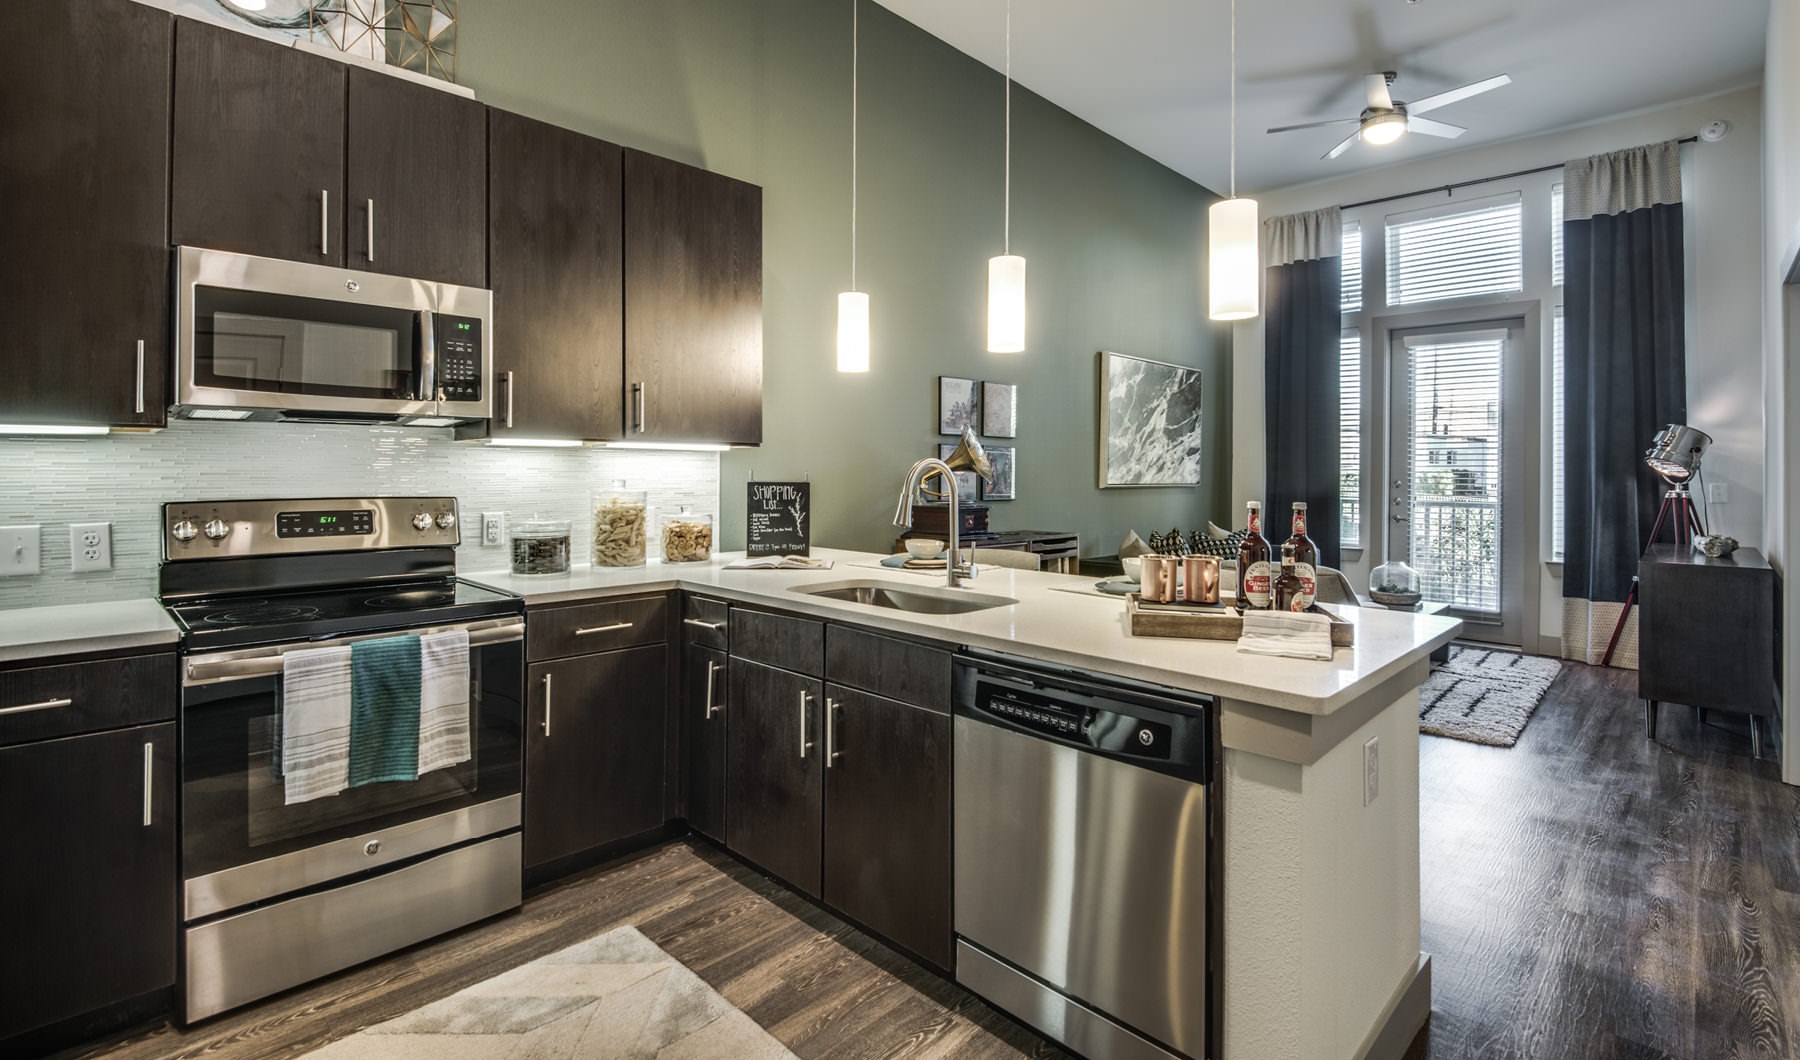 Model kitchen with stainless appliances and pendant lighting